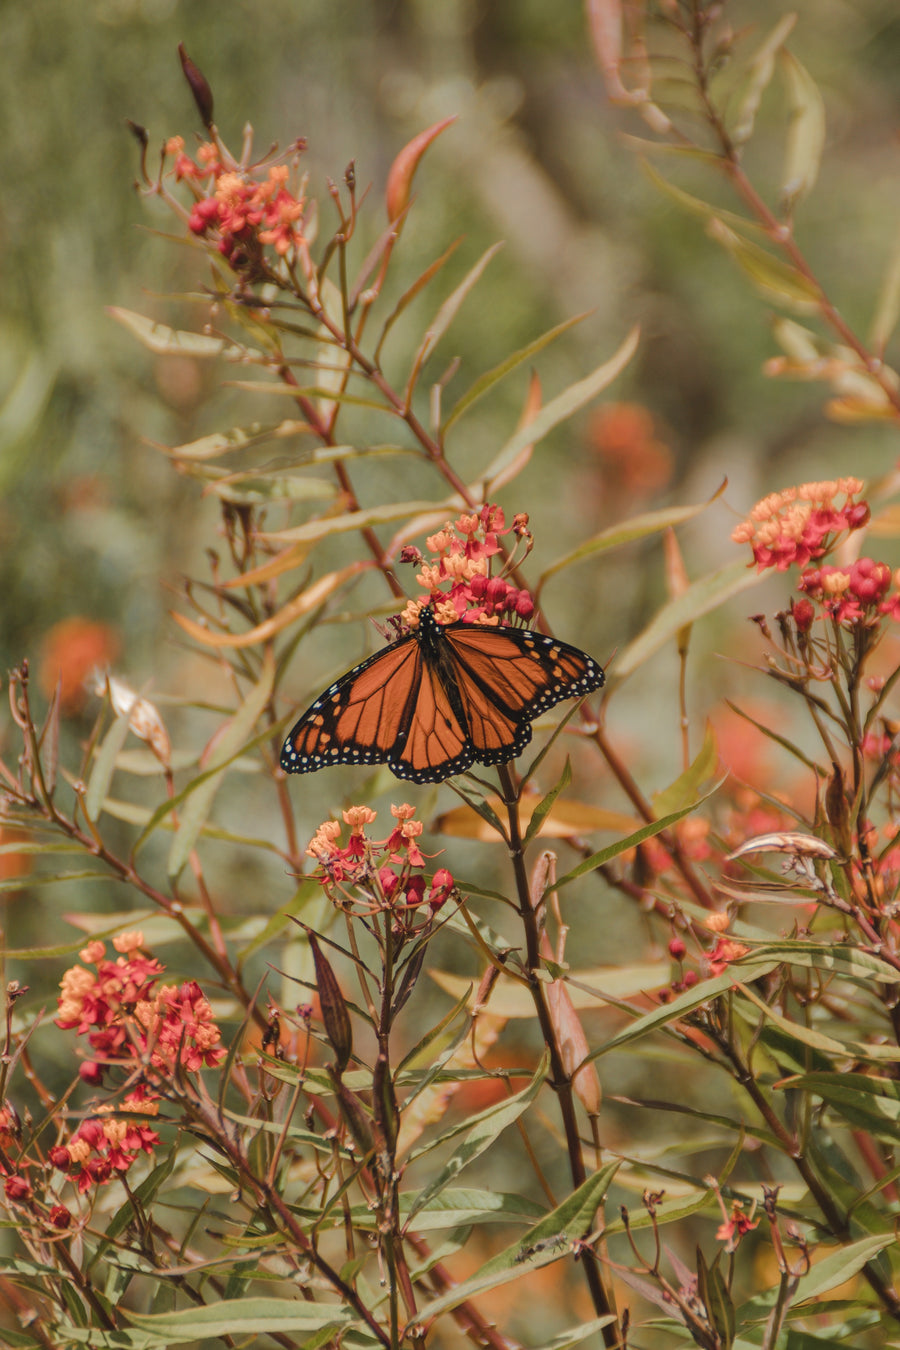 How to help save the monarch butterflies